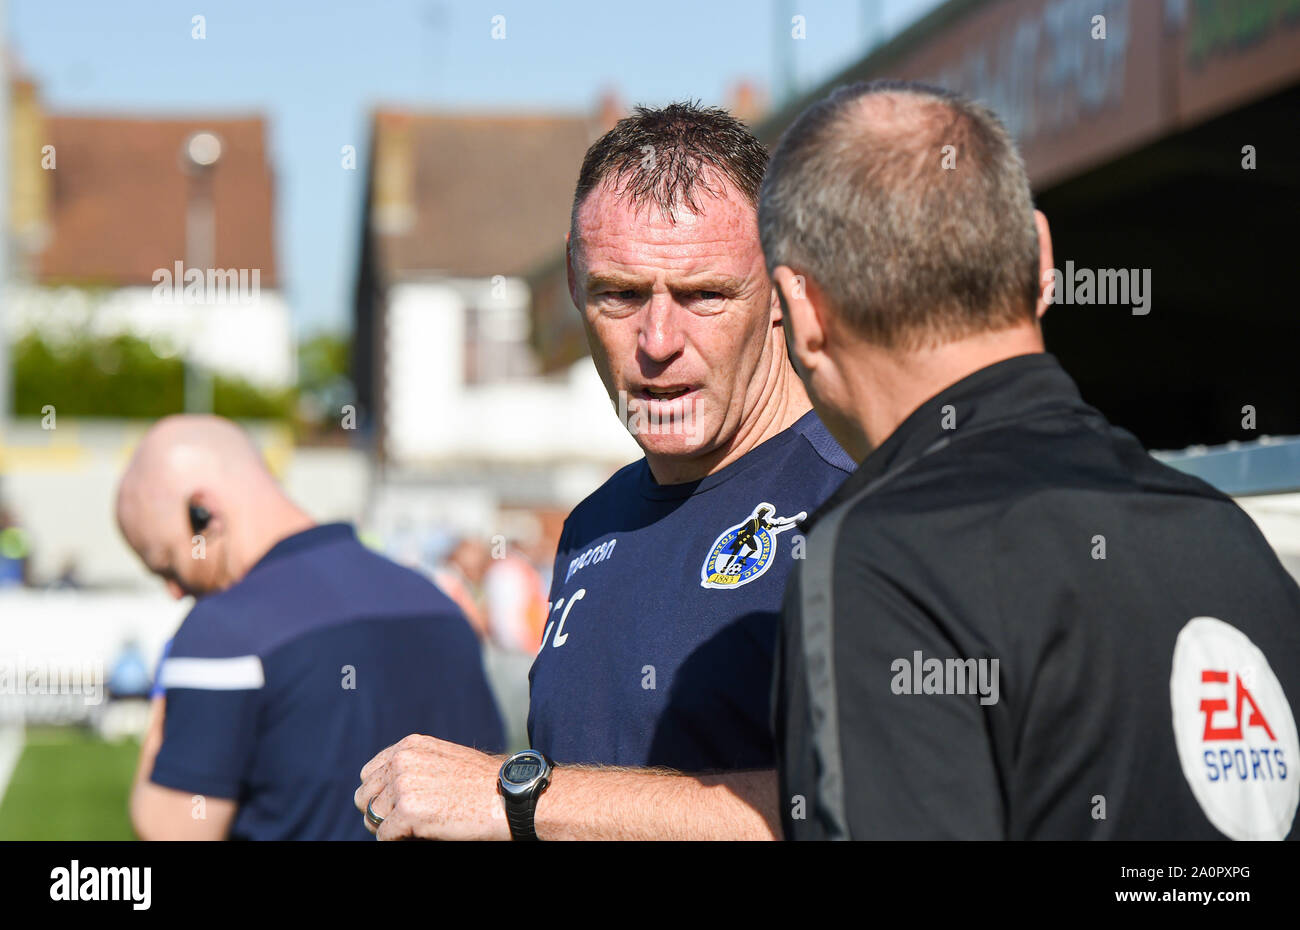 London UK 21 September 2019 - Bristol Rovers manager Graham Coughlan during the Sky Bet League One football match between AFC Wimbledon and Bristol Rovers at the Cherry Red Records Stadium - Editorial use only. No merchandising. For Football images FA and Premier League restrictions apply inc. no internet/mobile usage without FAPL license - for details contact Football Dataco. Credit  : Simon Dack TPI / Alamy Live News Stock Photo